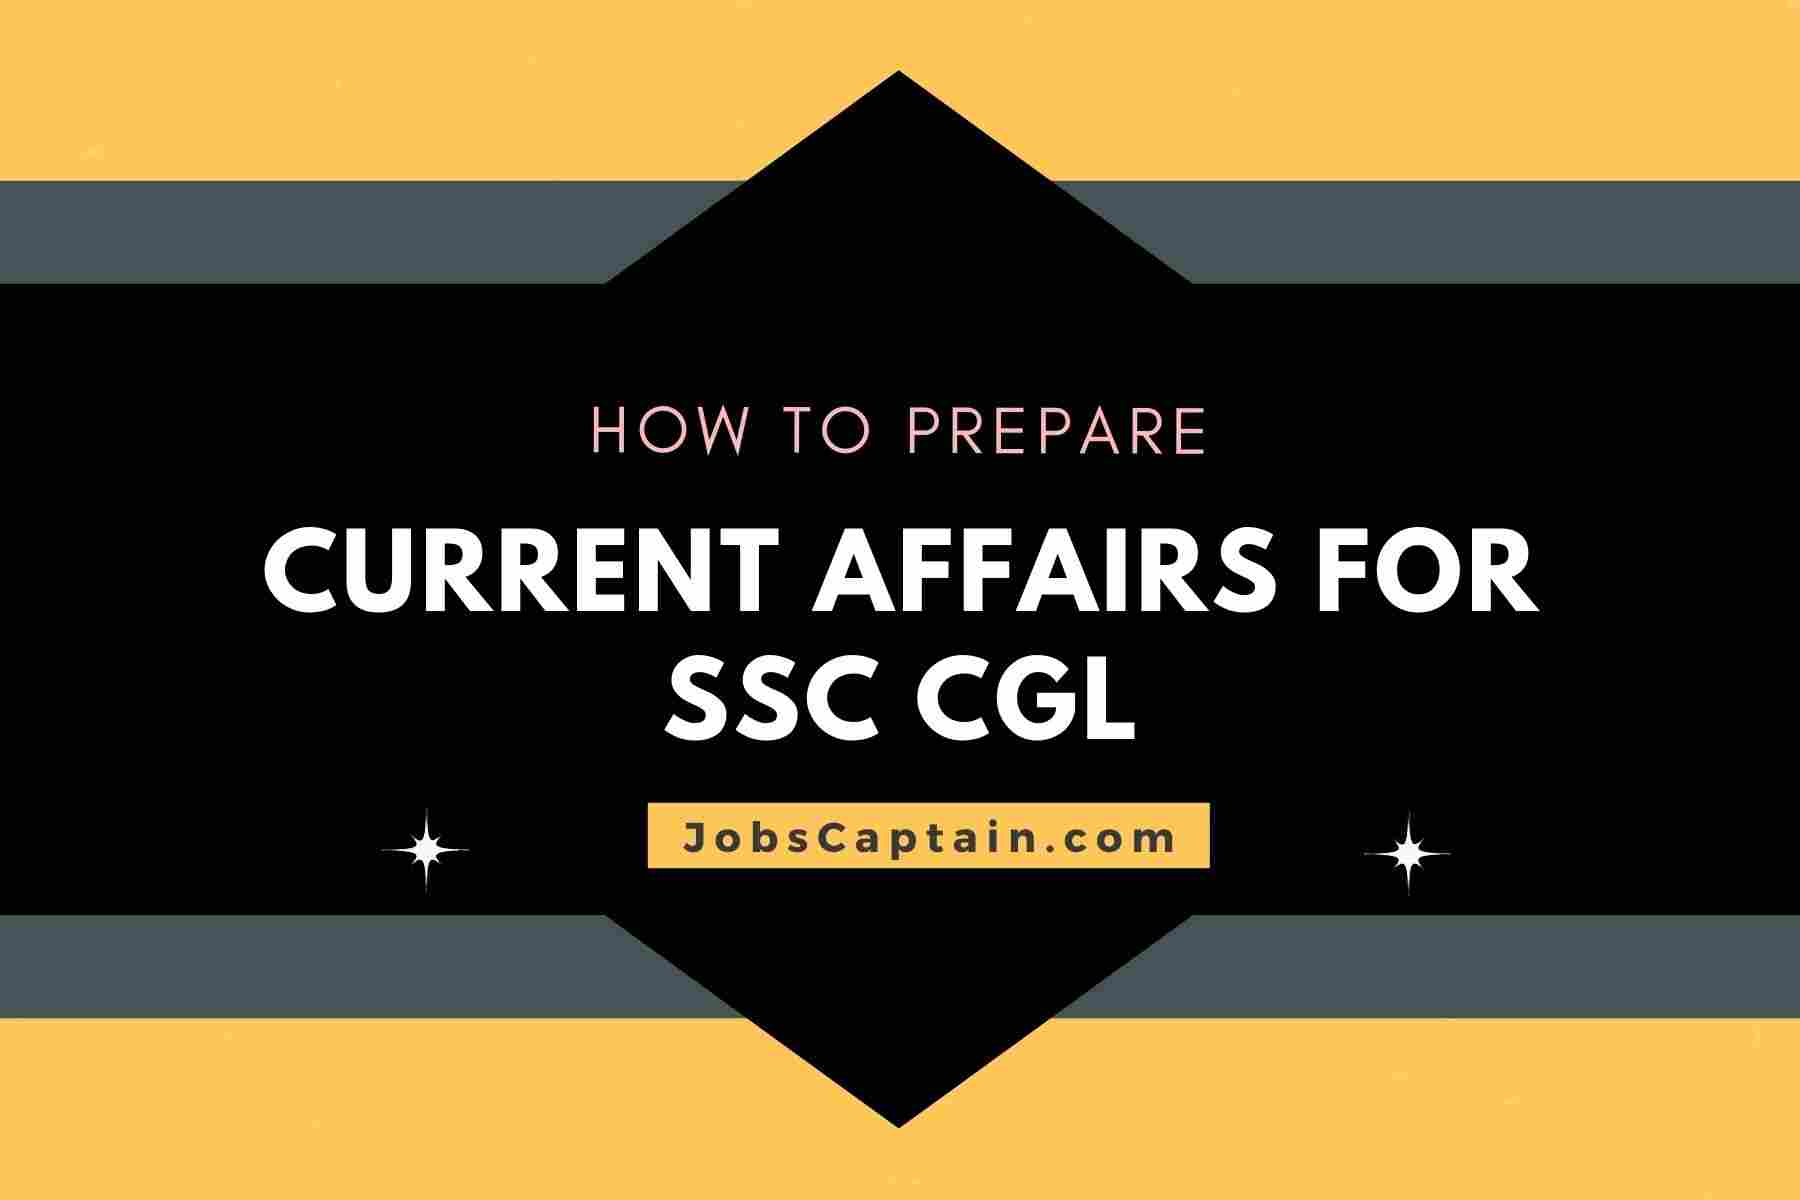 How to Prepare Current Affairs for SSC CGL